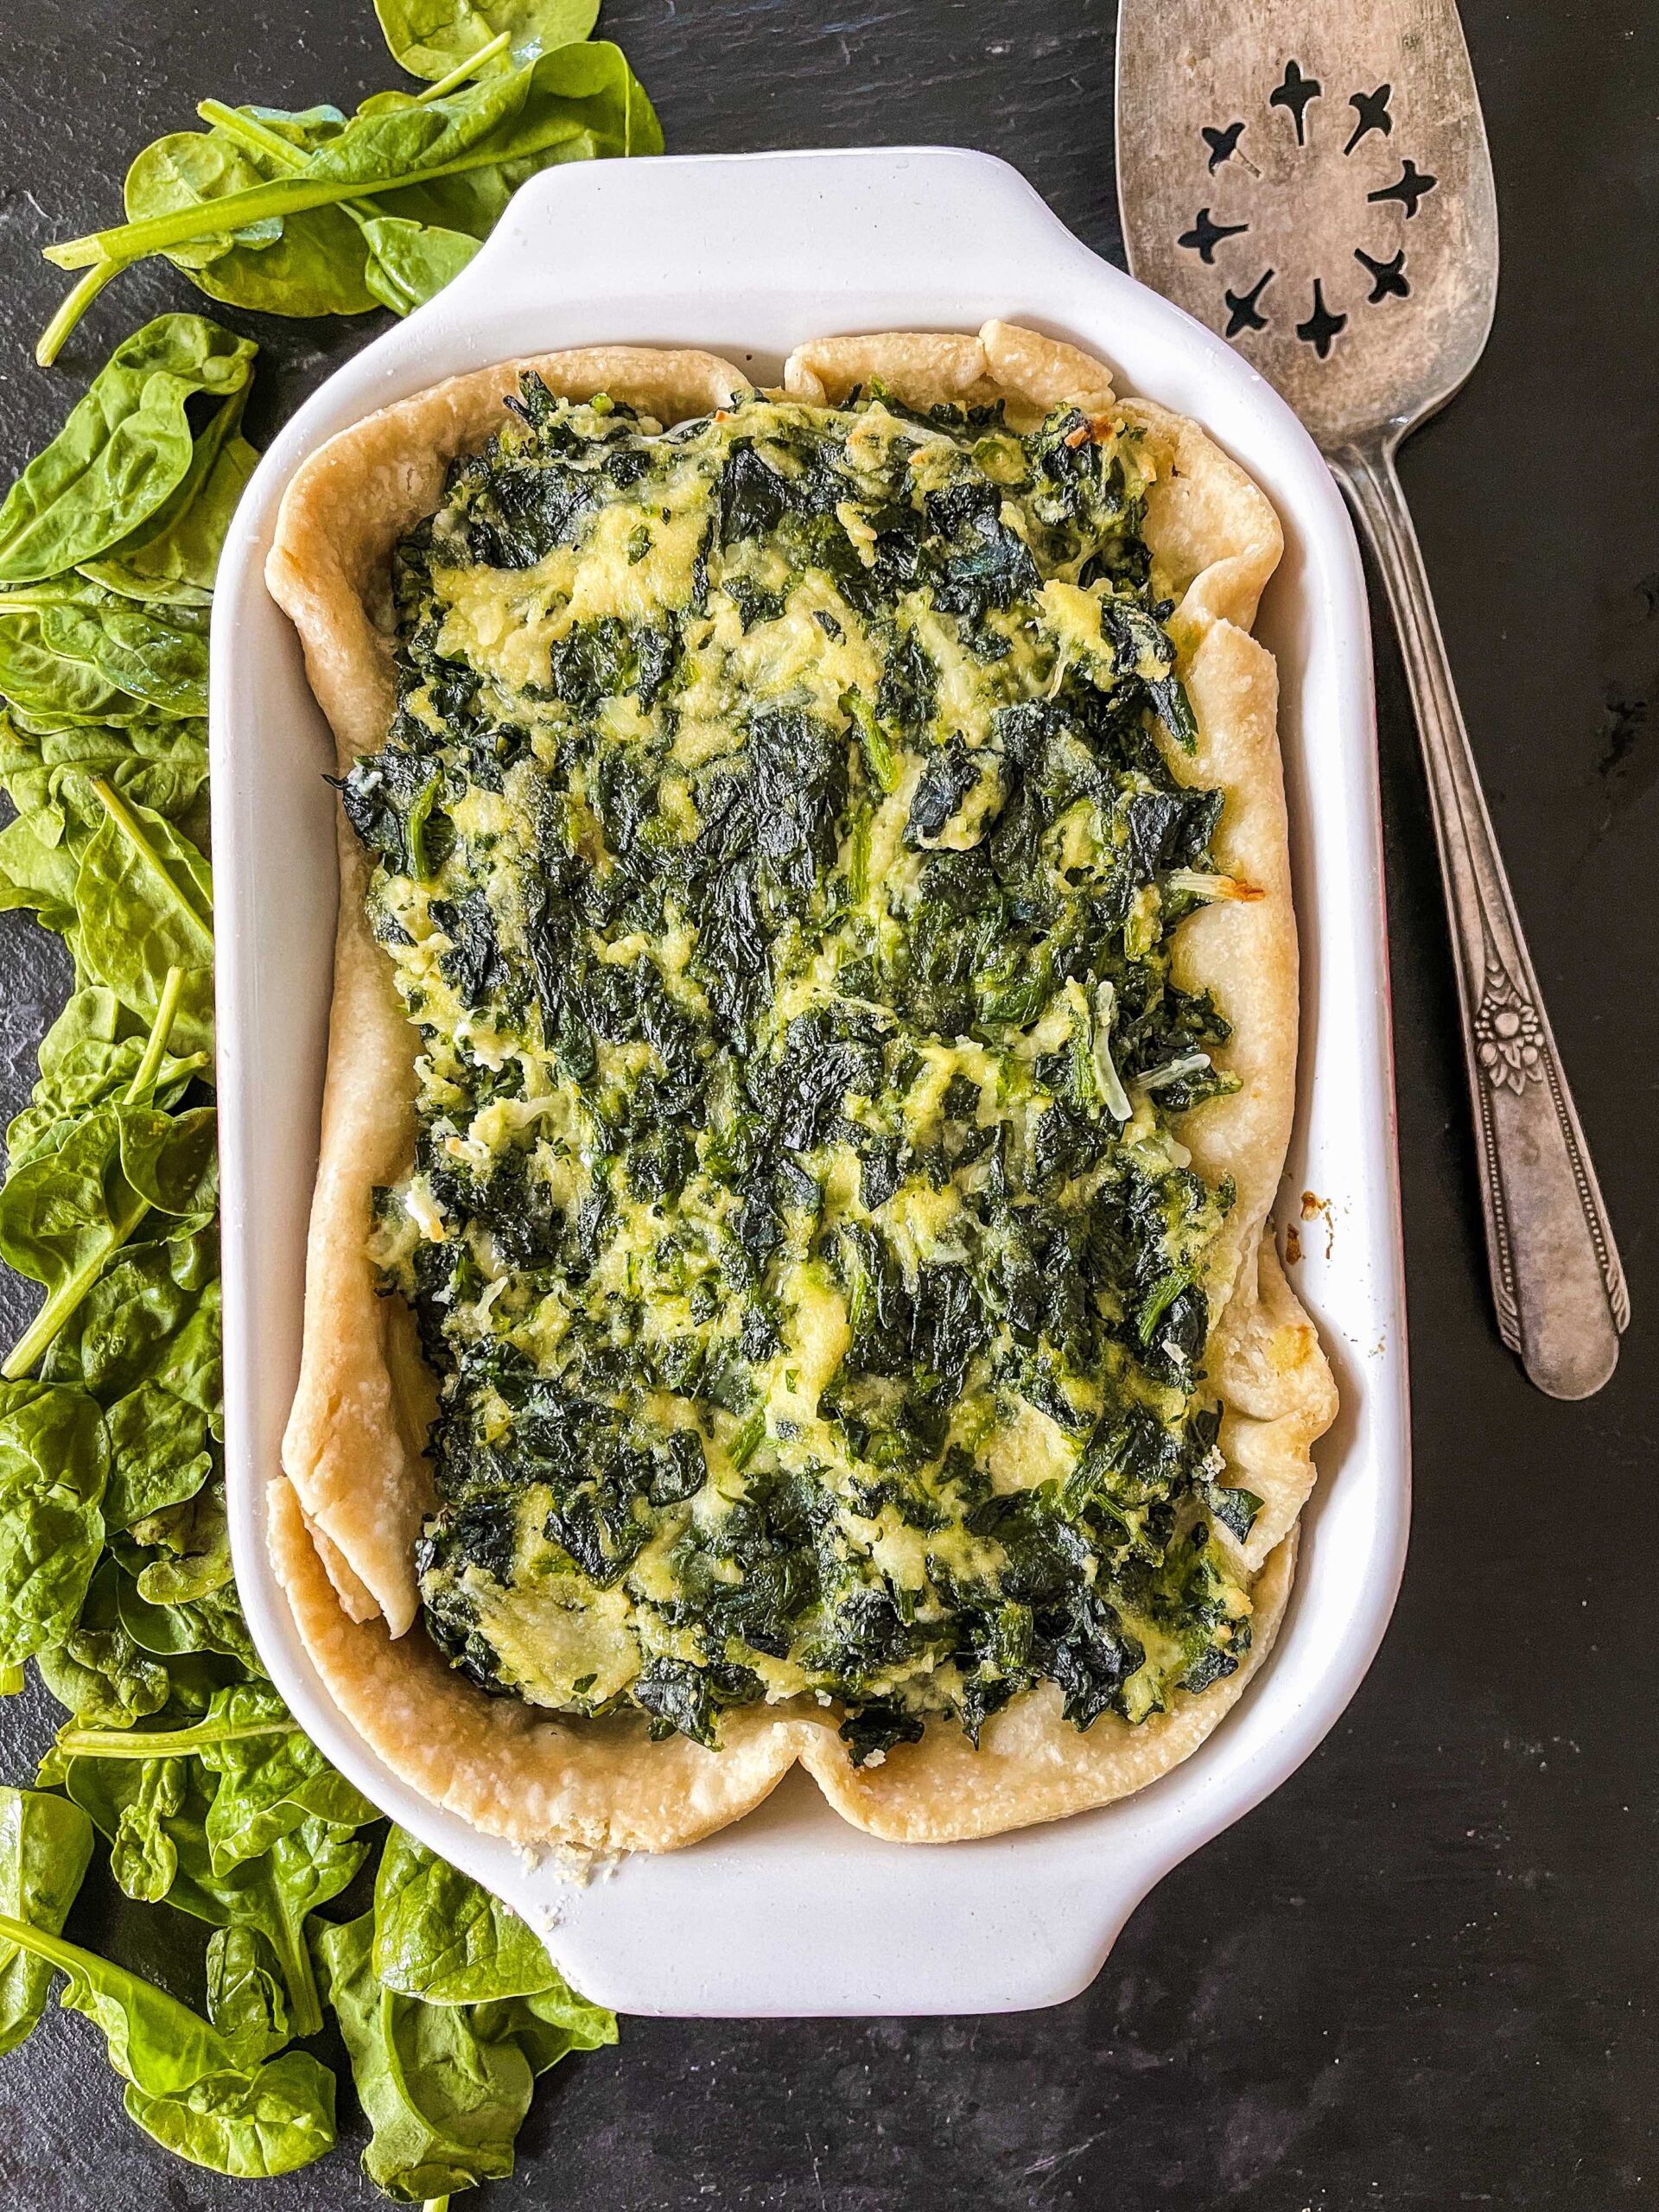 Overhead view of spinach pie with serving utensil.